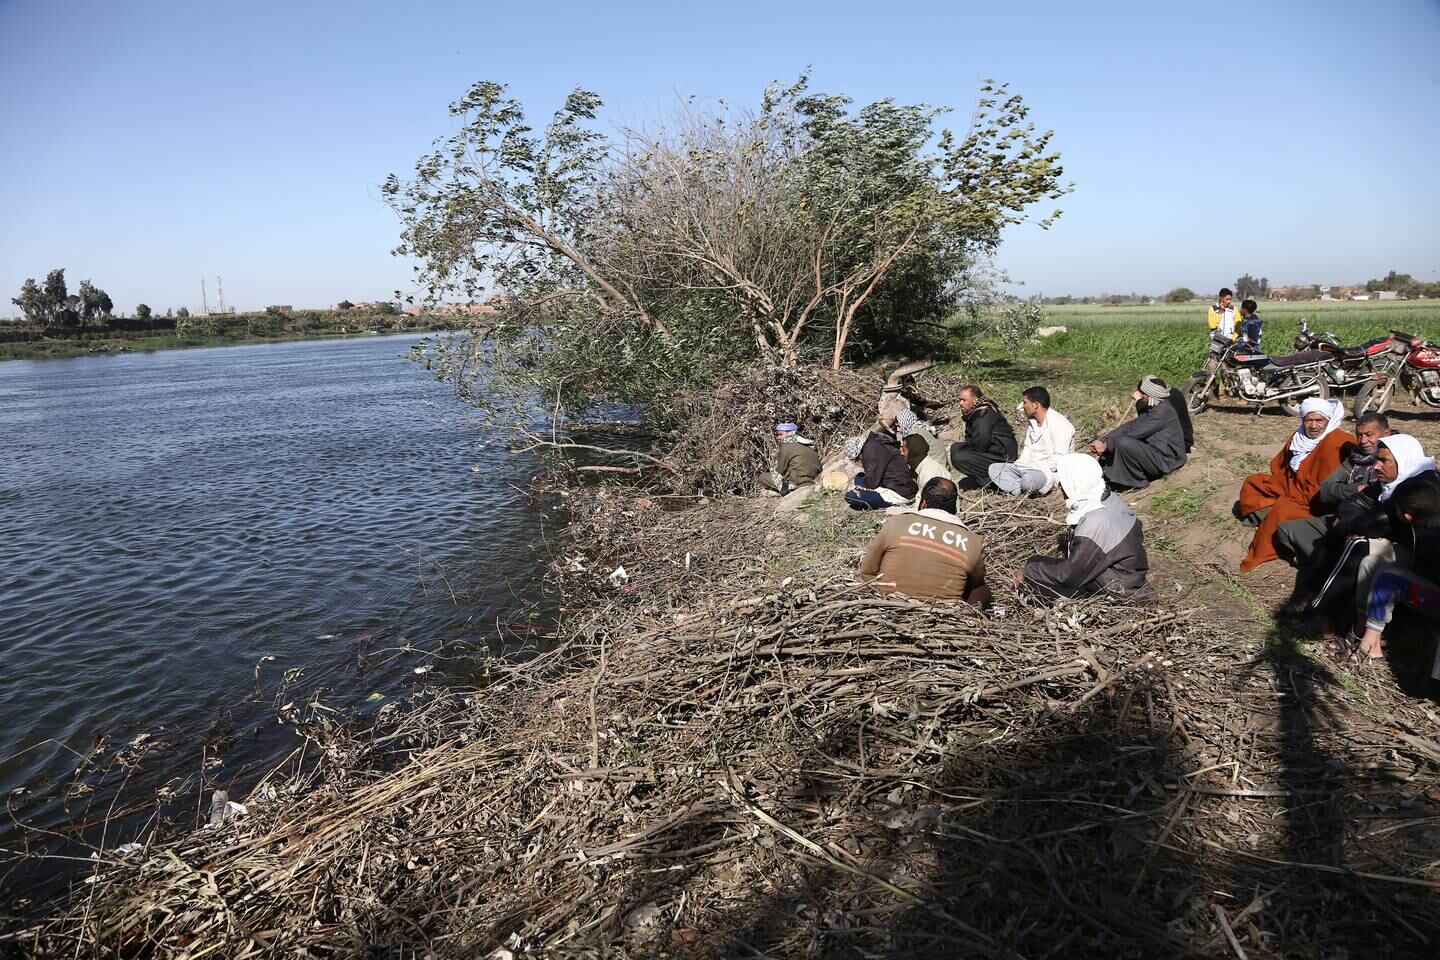 Egyptians watch as Rescue personnel conduct a search operation on the River Nile for possible victims after a truck fell off a ferry. EPA